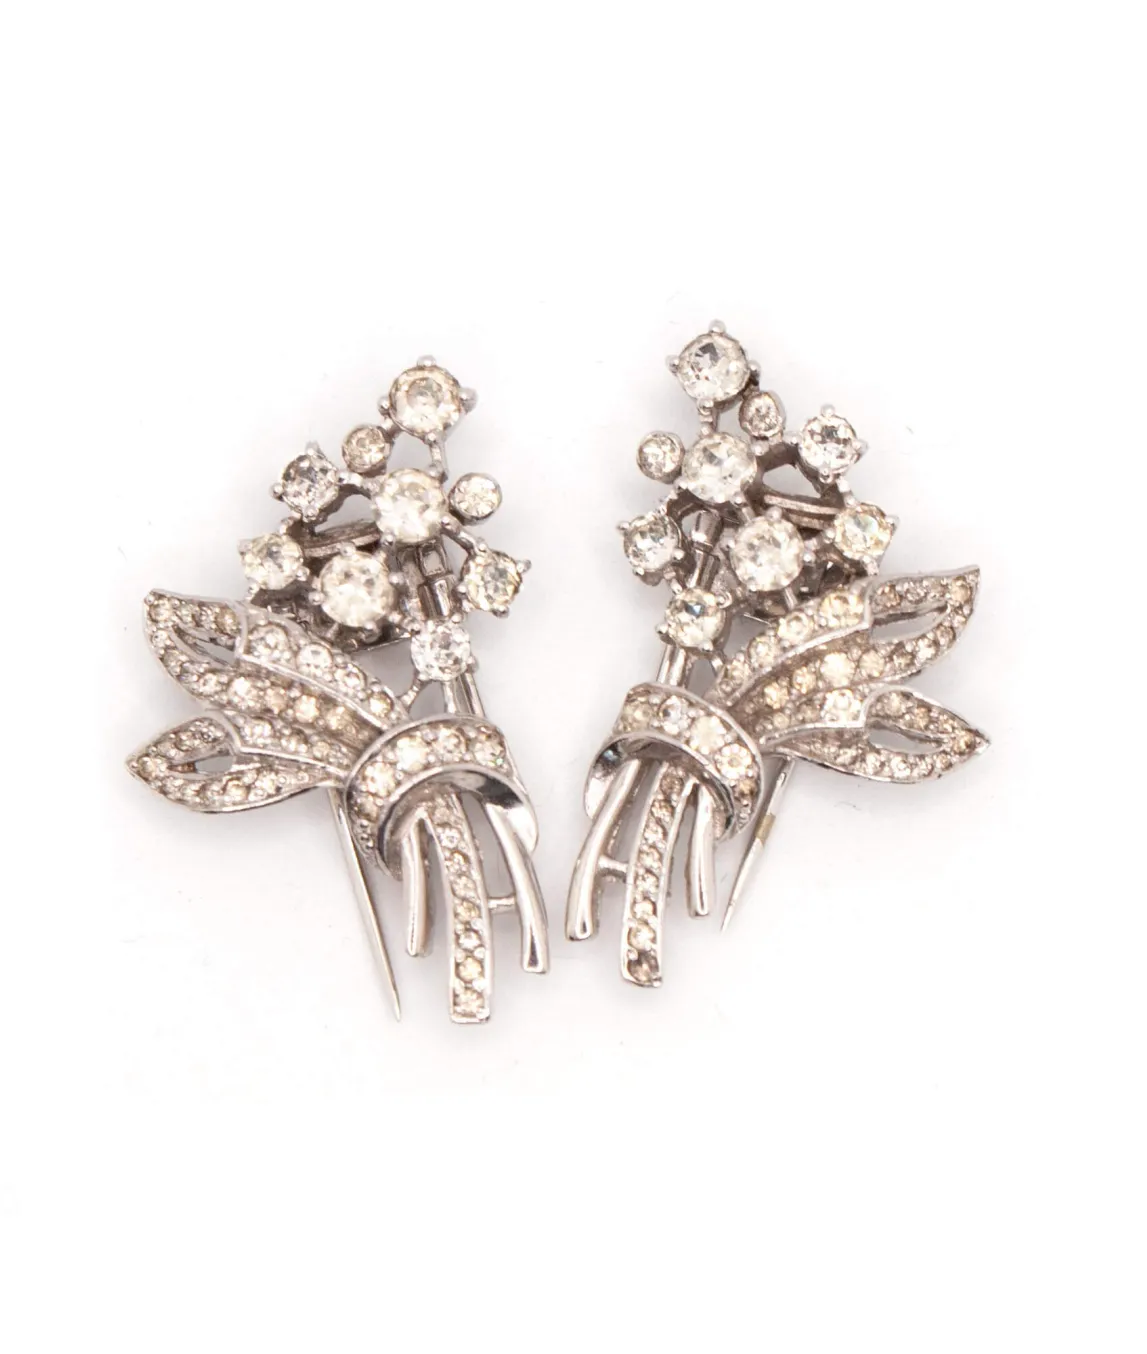 Ciro CP 1930 pair of floral bouquet fur clips rhodium plated metal